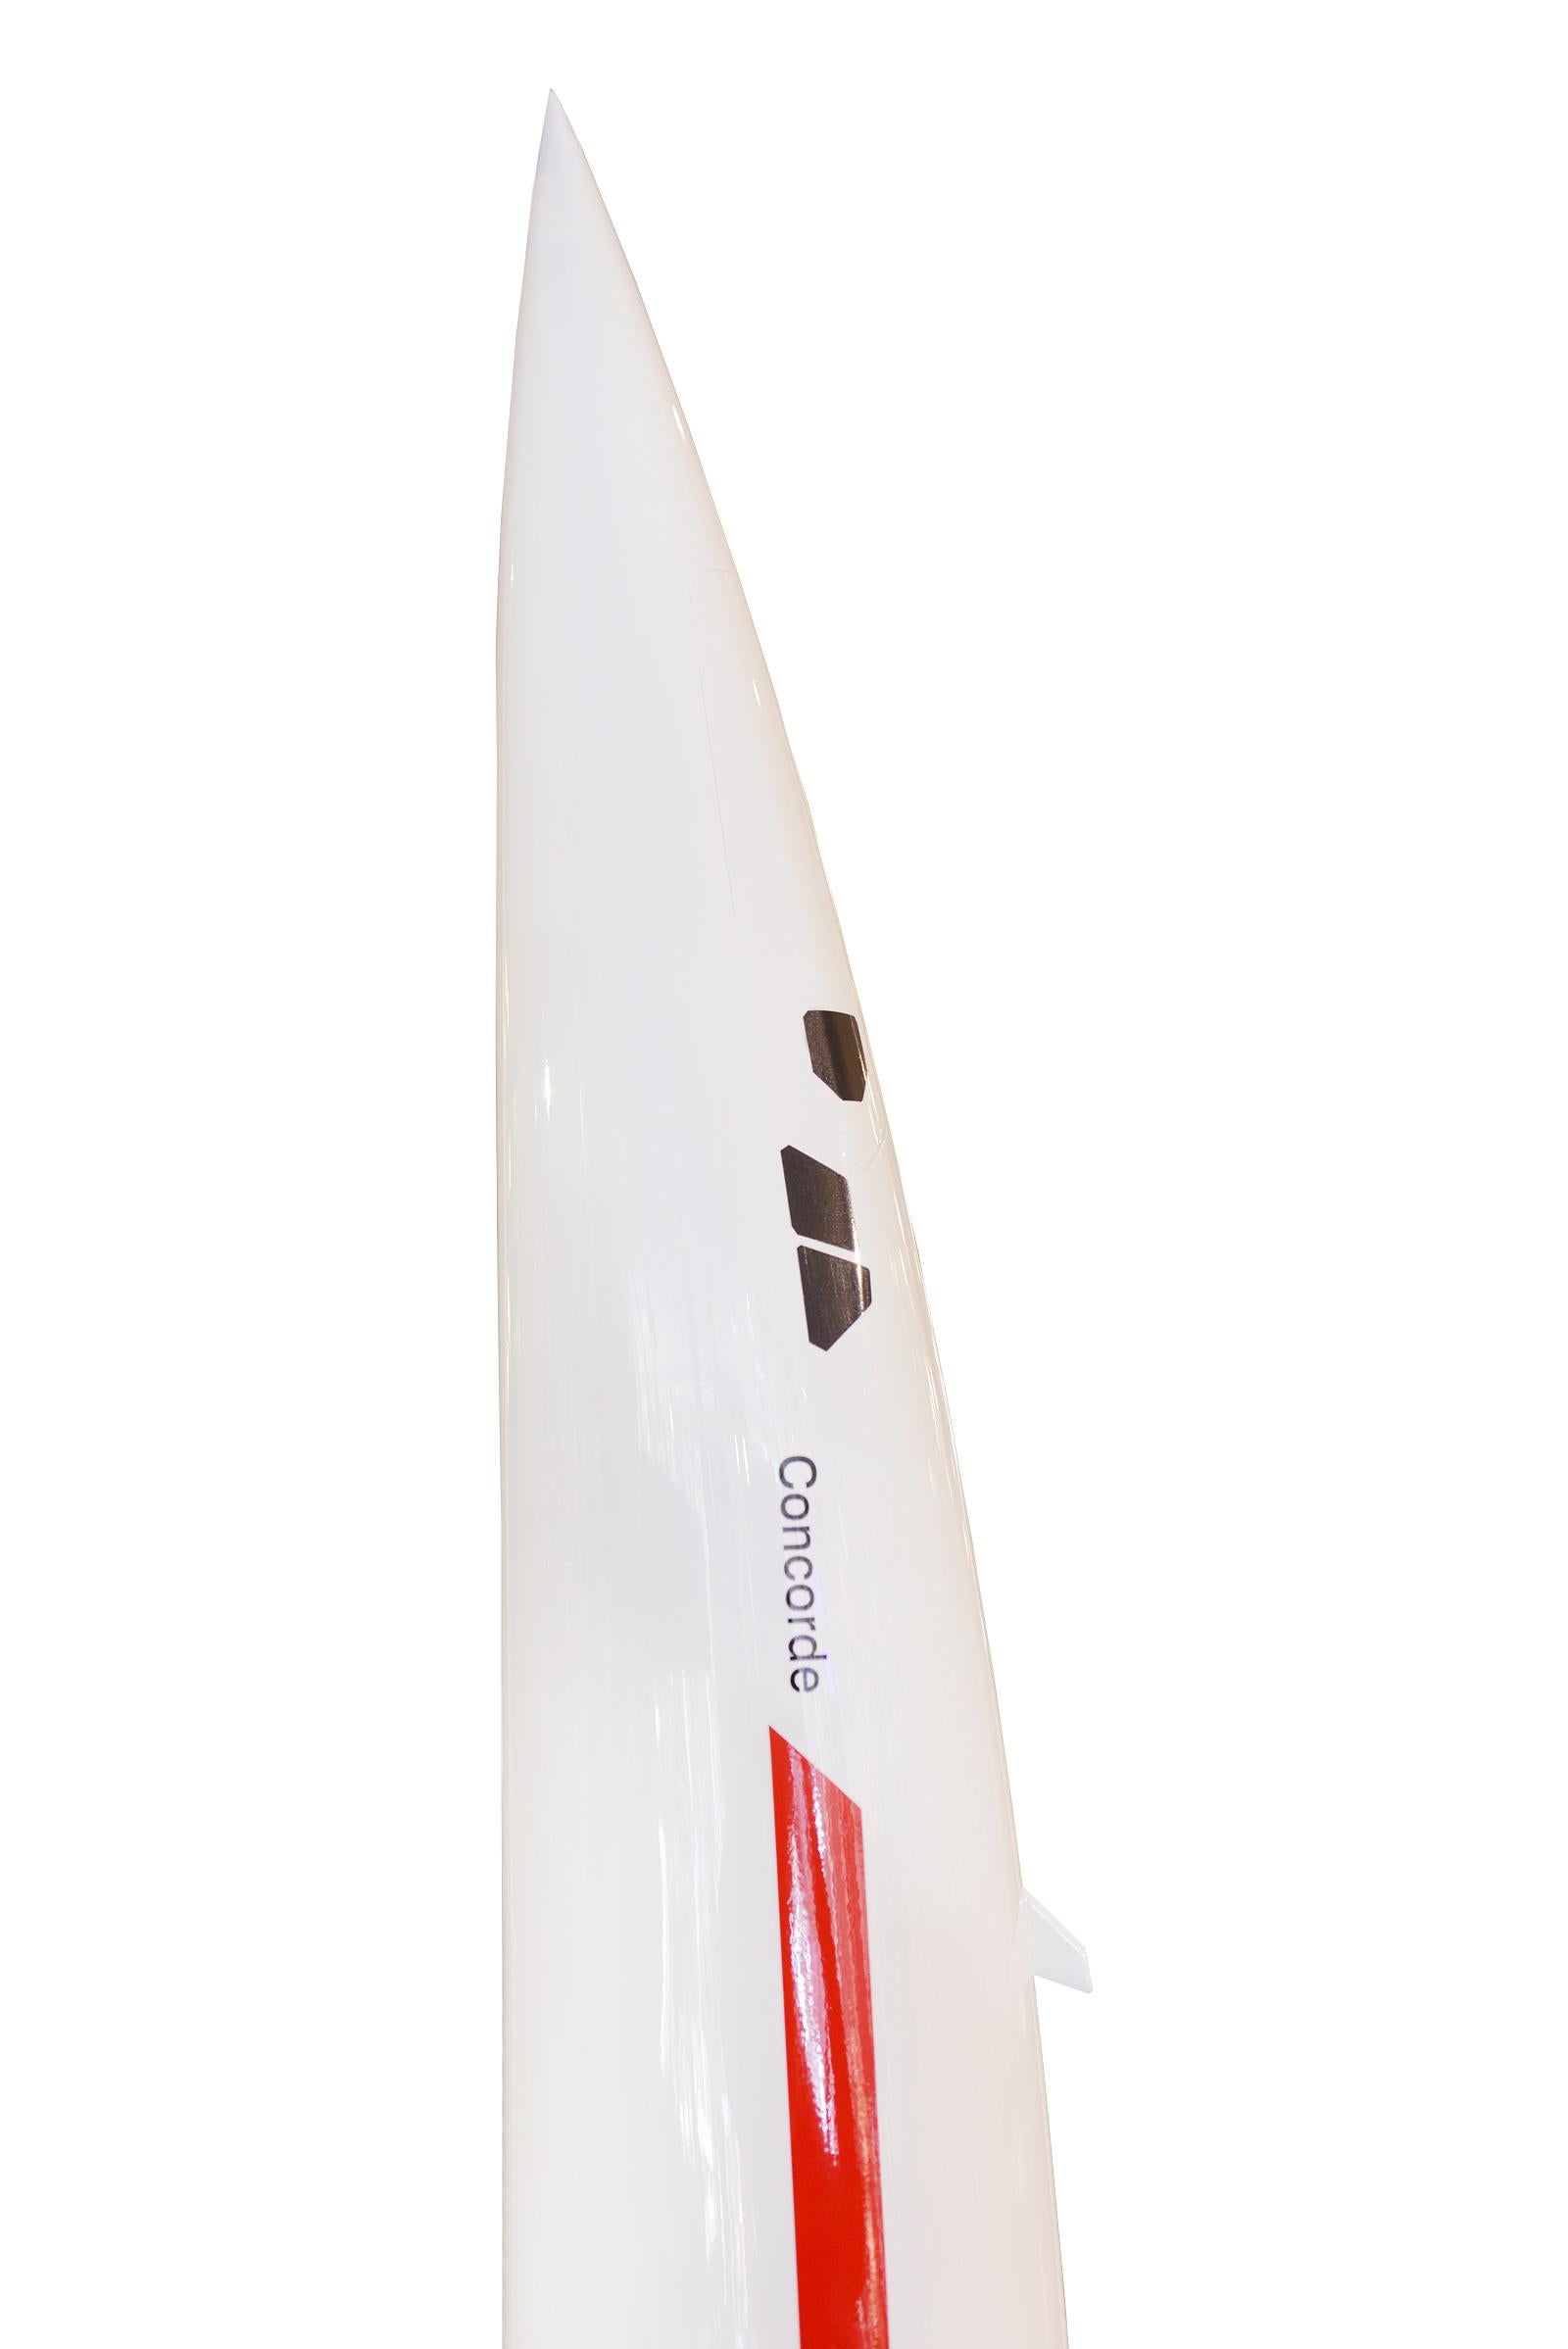 Concorde Model Sculpture in Resin Scale 1/25 For Sale 2